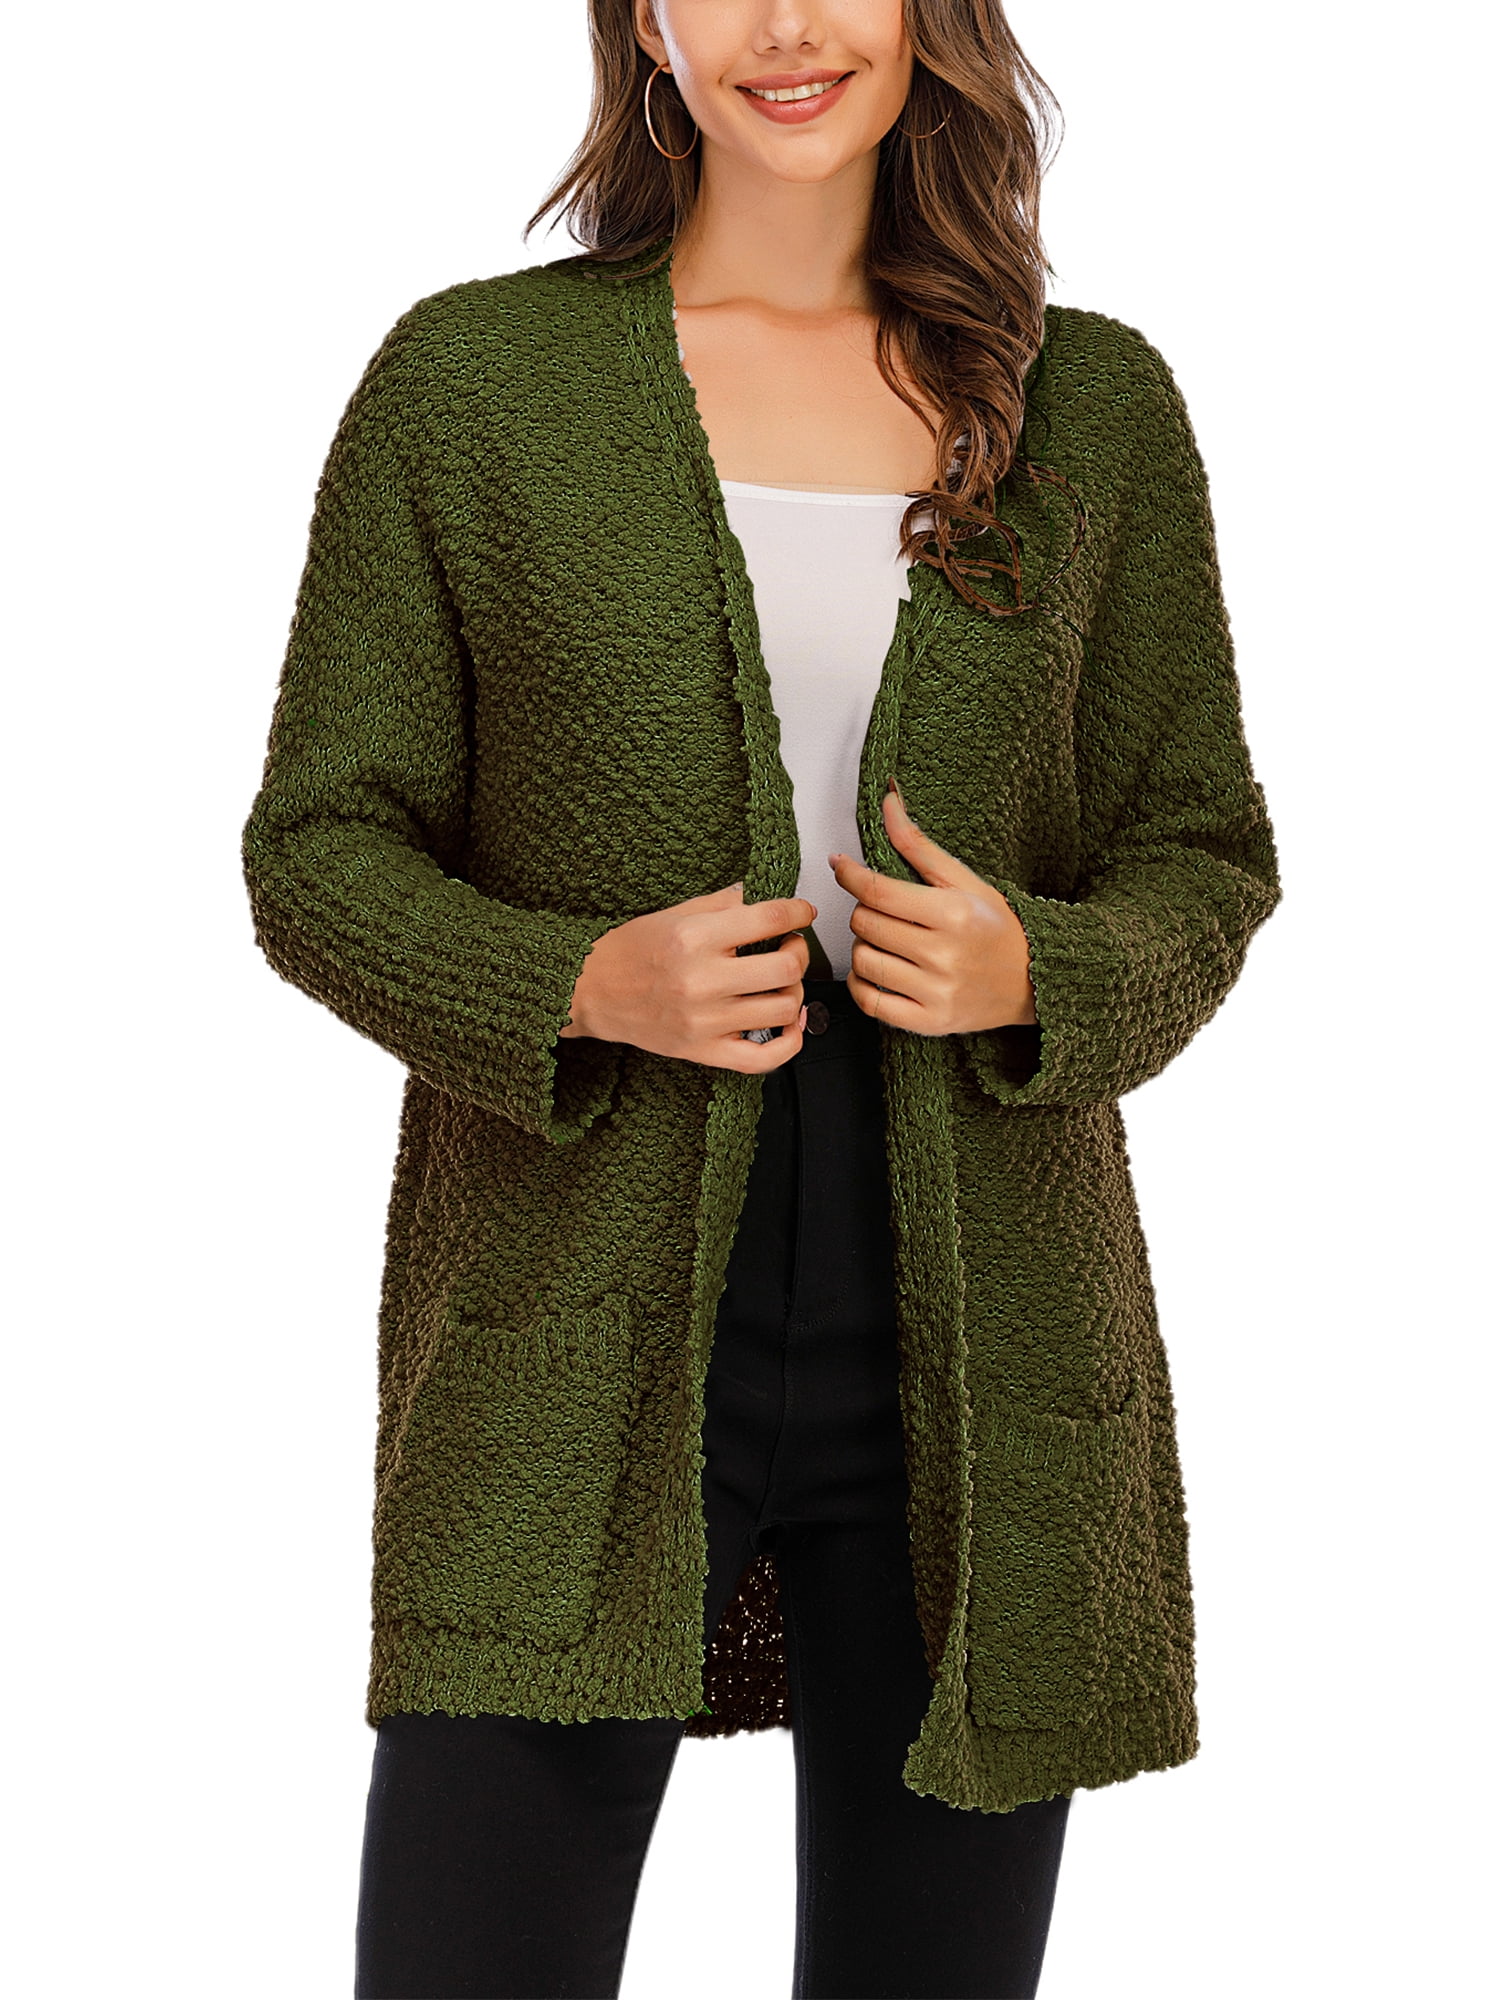 NEW LADIES WINTER WARM KNITTED LONG SLEEVE POCKET CARDIGAN JUMPER TOP SIZE 12-24